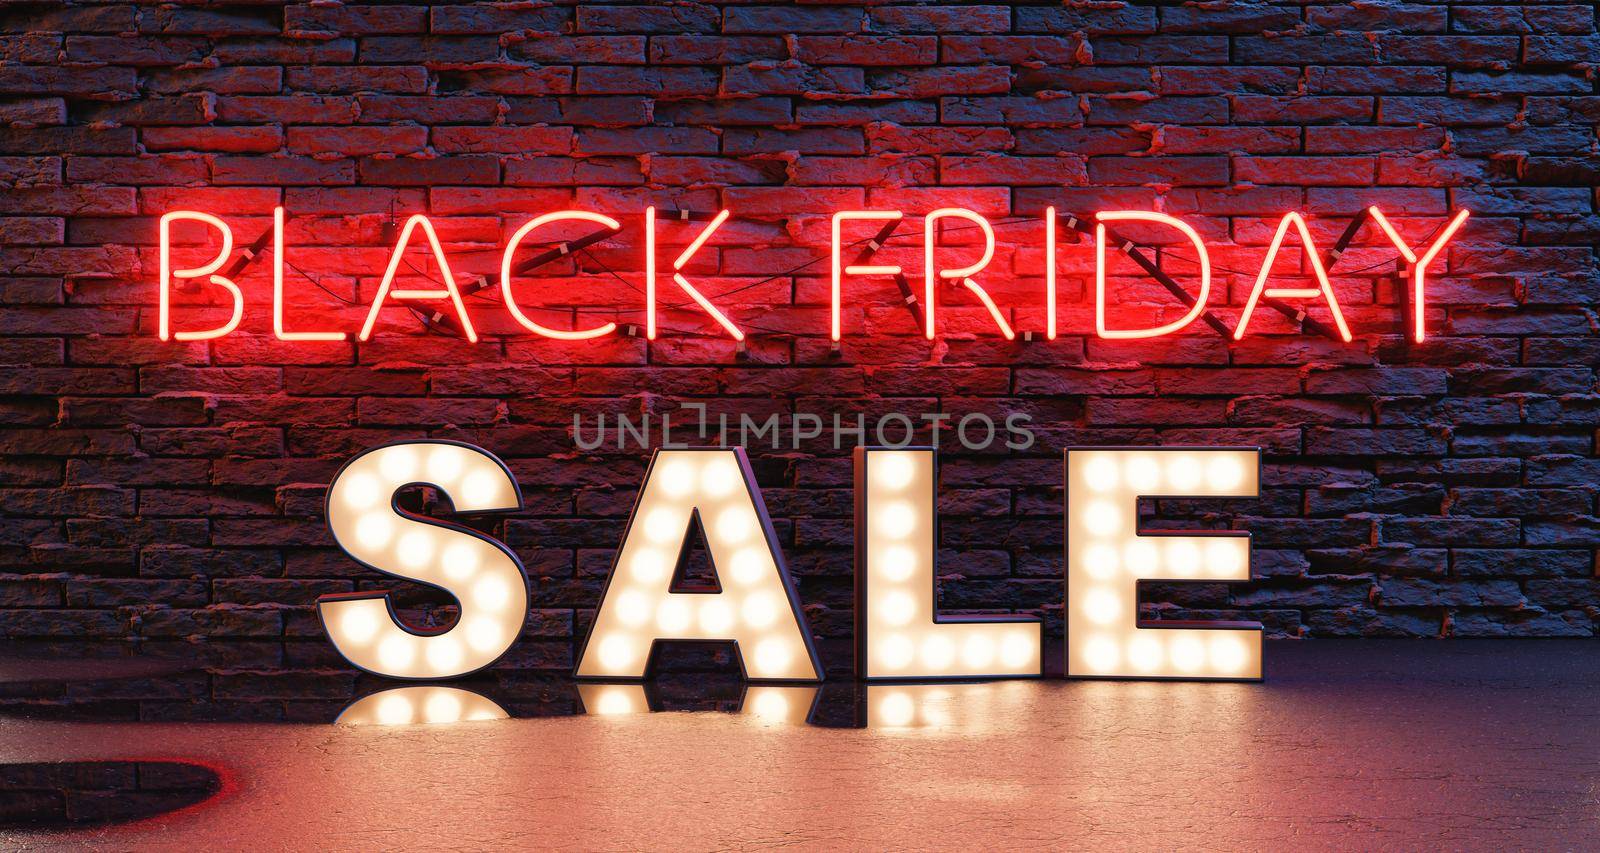 Neon Black Friday Sale signs by asolano